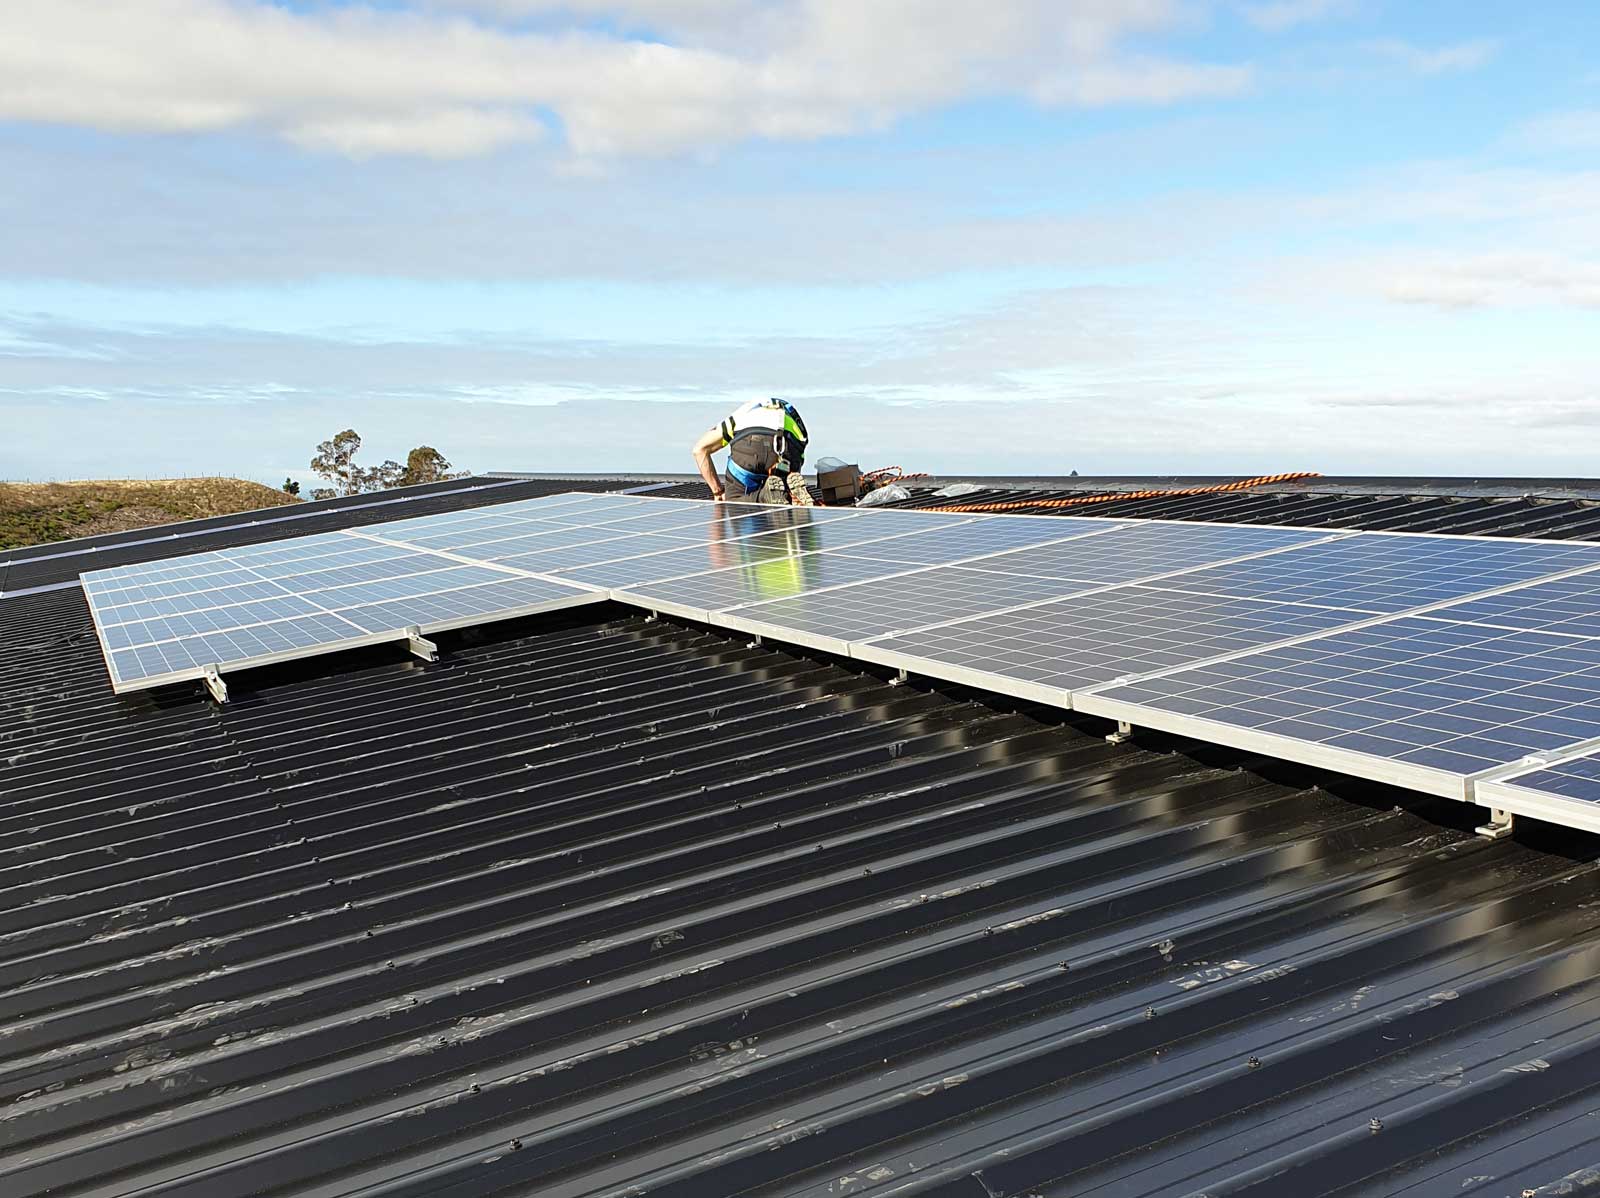 Installing solar power panels on a commercial building